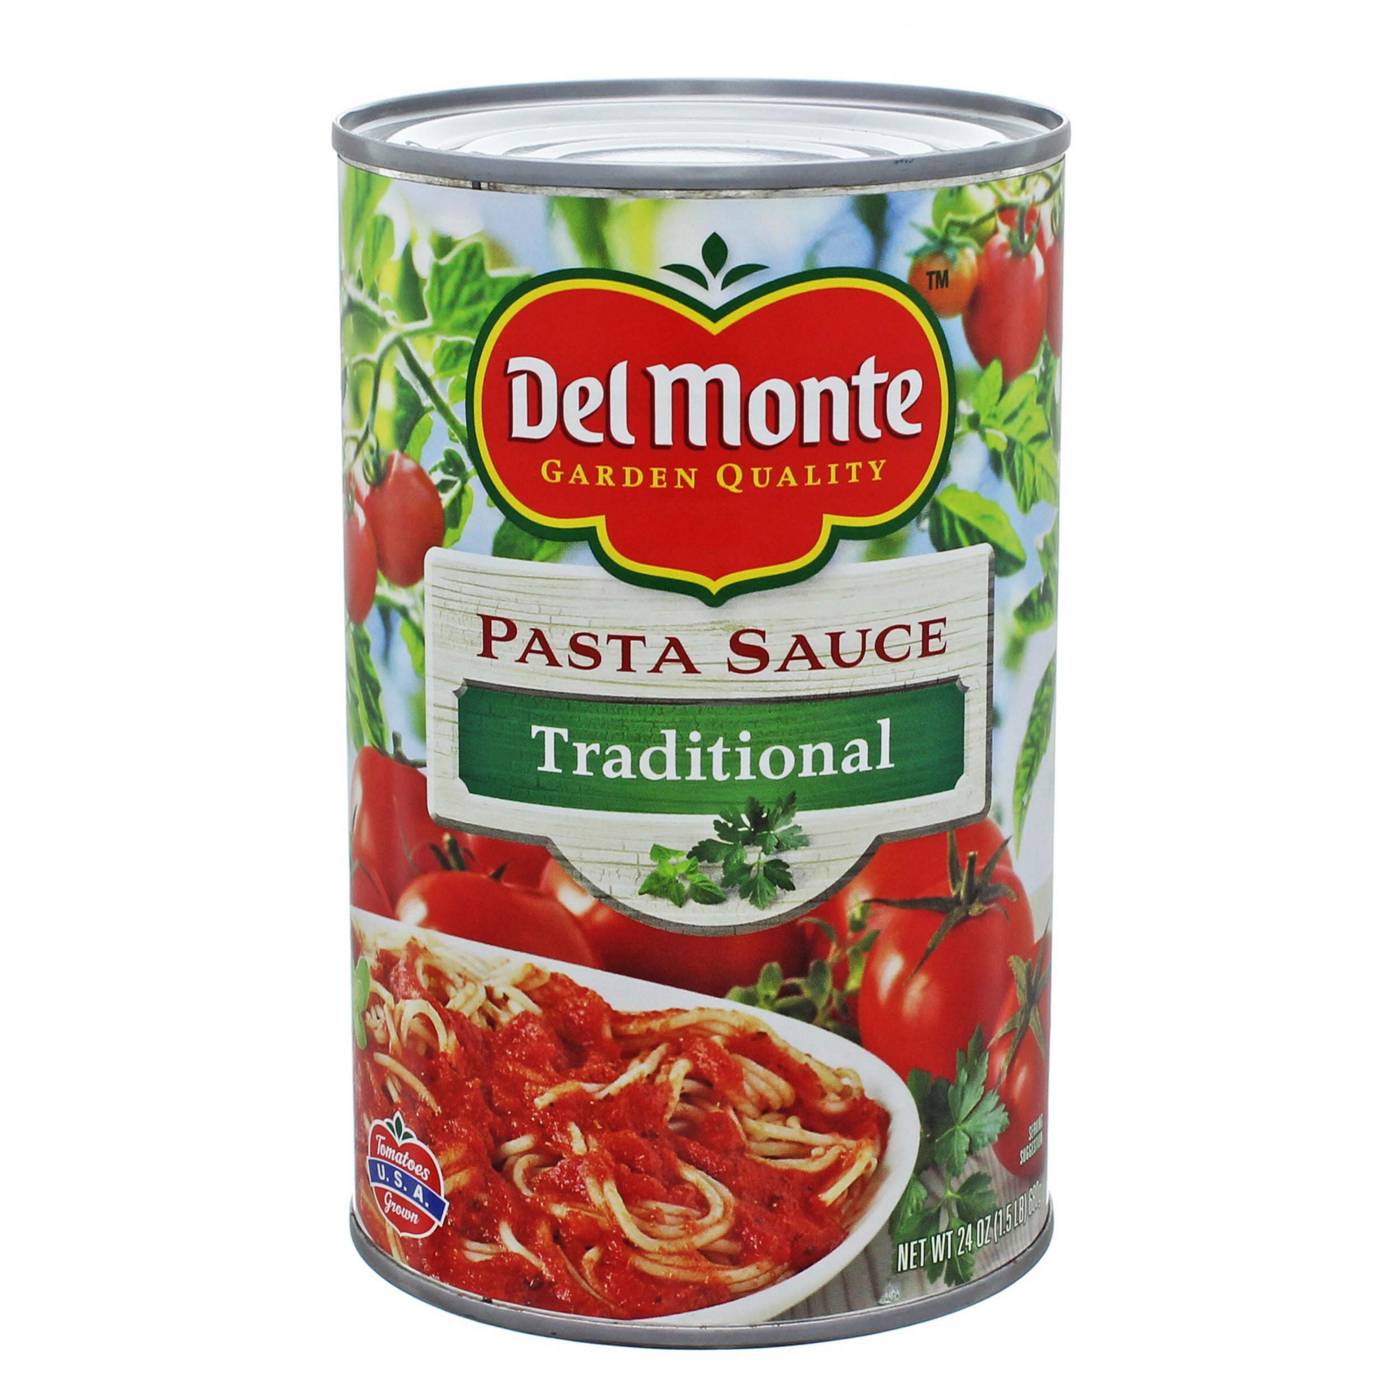 Del Monte Traditional Pasta Sauce; image 1 of 2